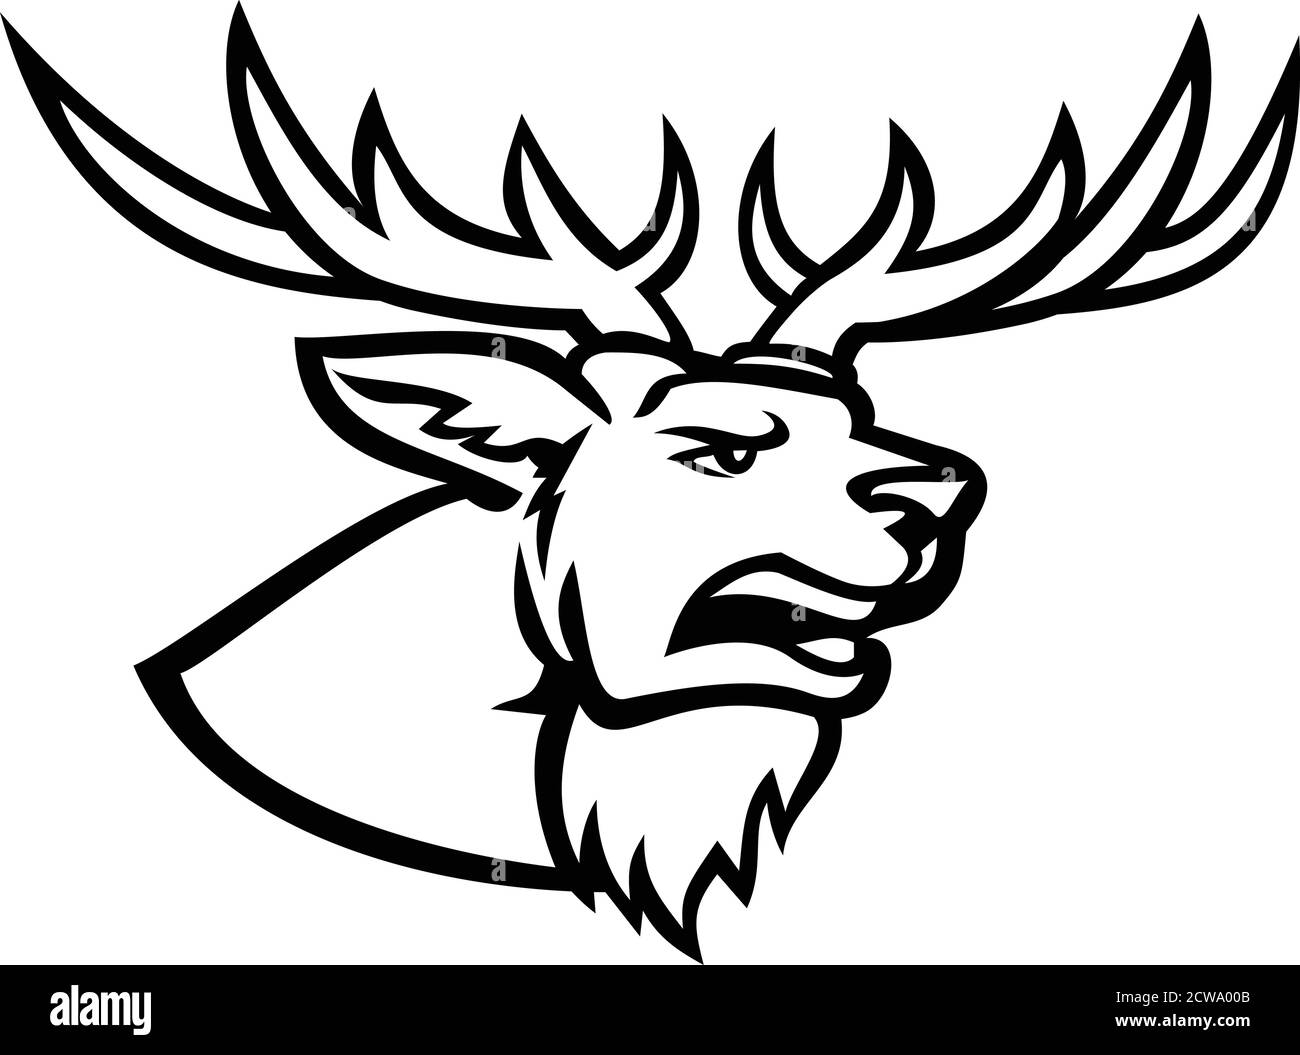 Mascot illustration of head of a stag or buck red deer Cervus elaphus, one of the largest deer species, with antlers and roaring viewed from side on i Stock Vector